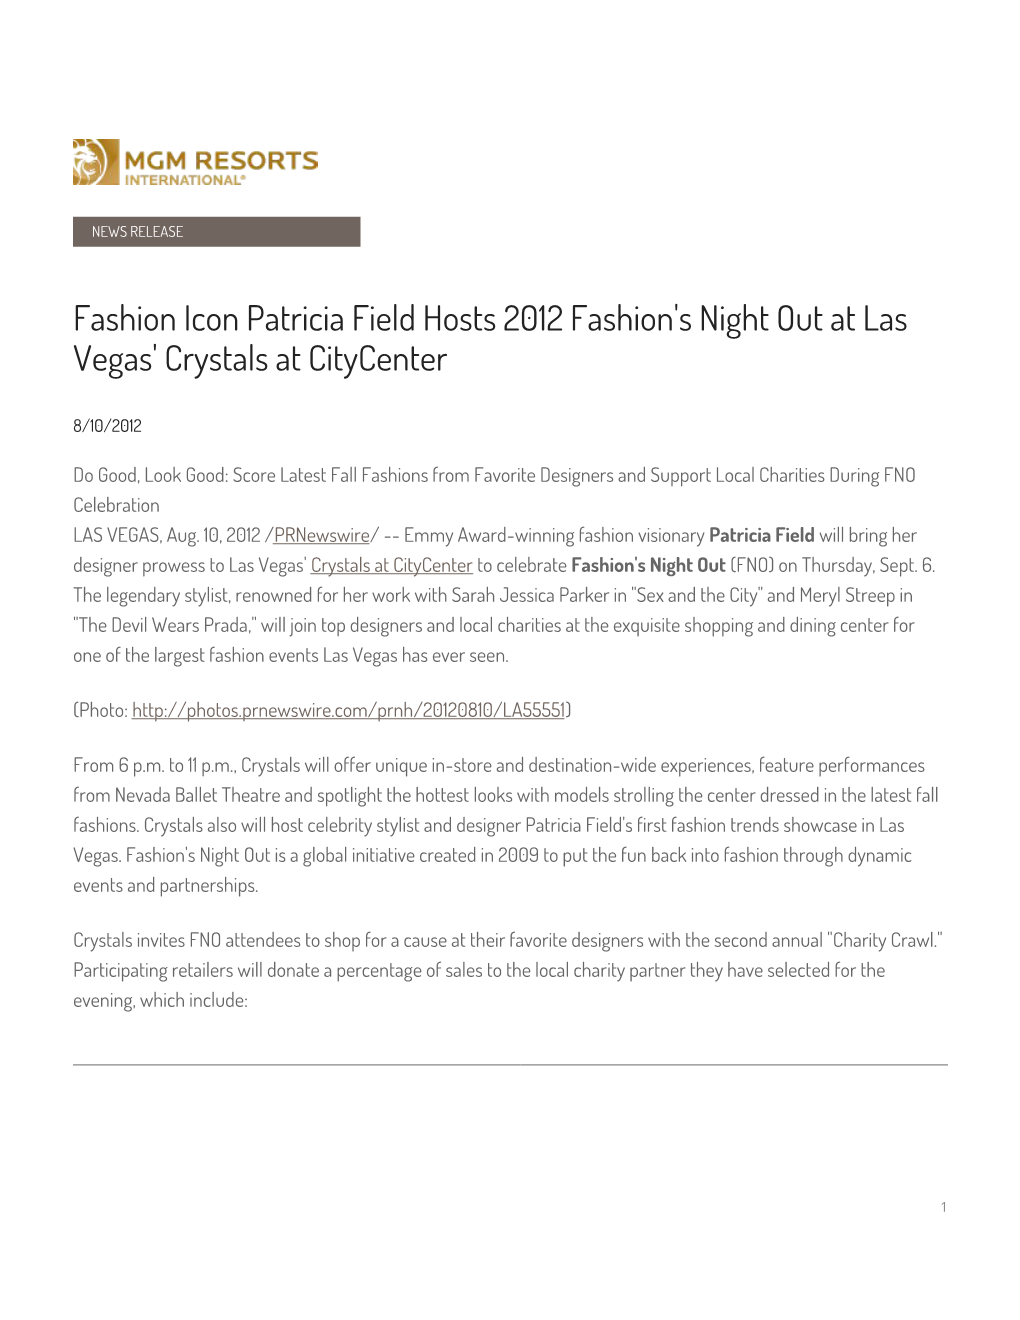 Fashion Icon Patricia Field Hosts 2012 Fashion's Night out at Las Vegas' Crystals at Citycenter